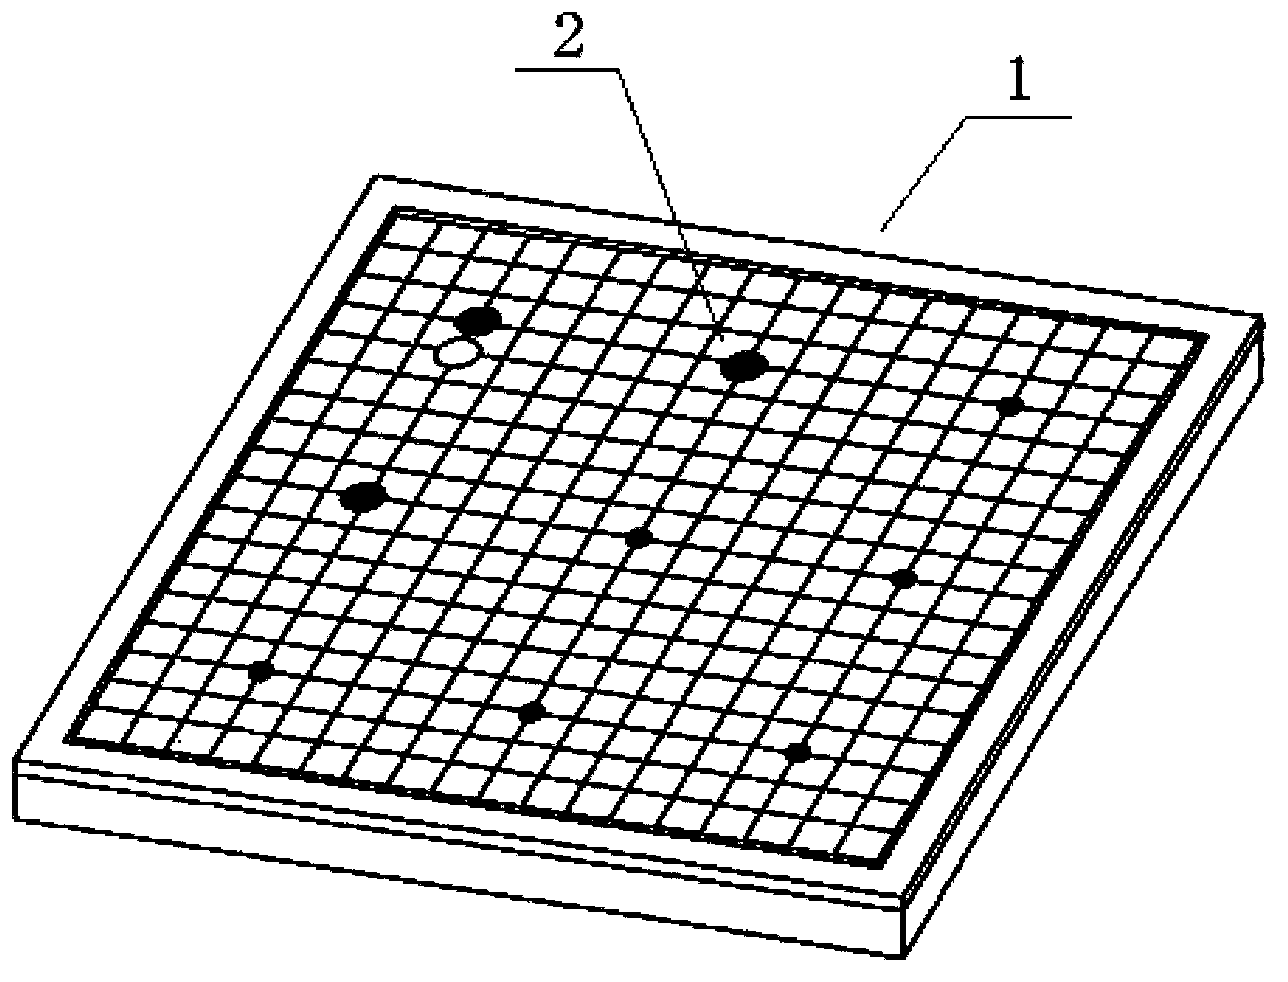 Electronic checkerboard system